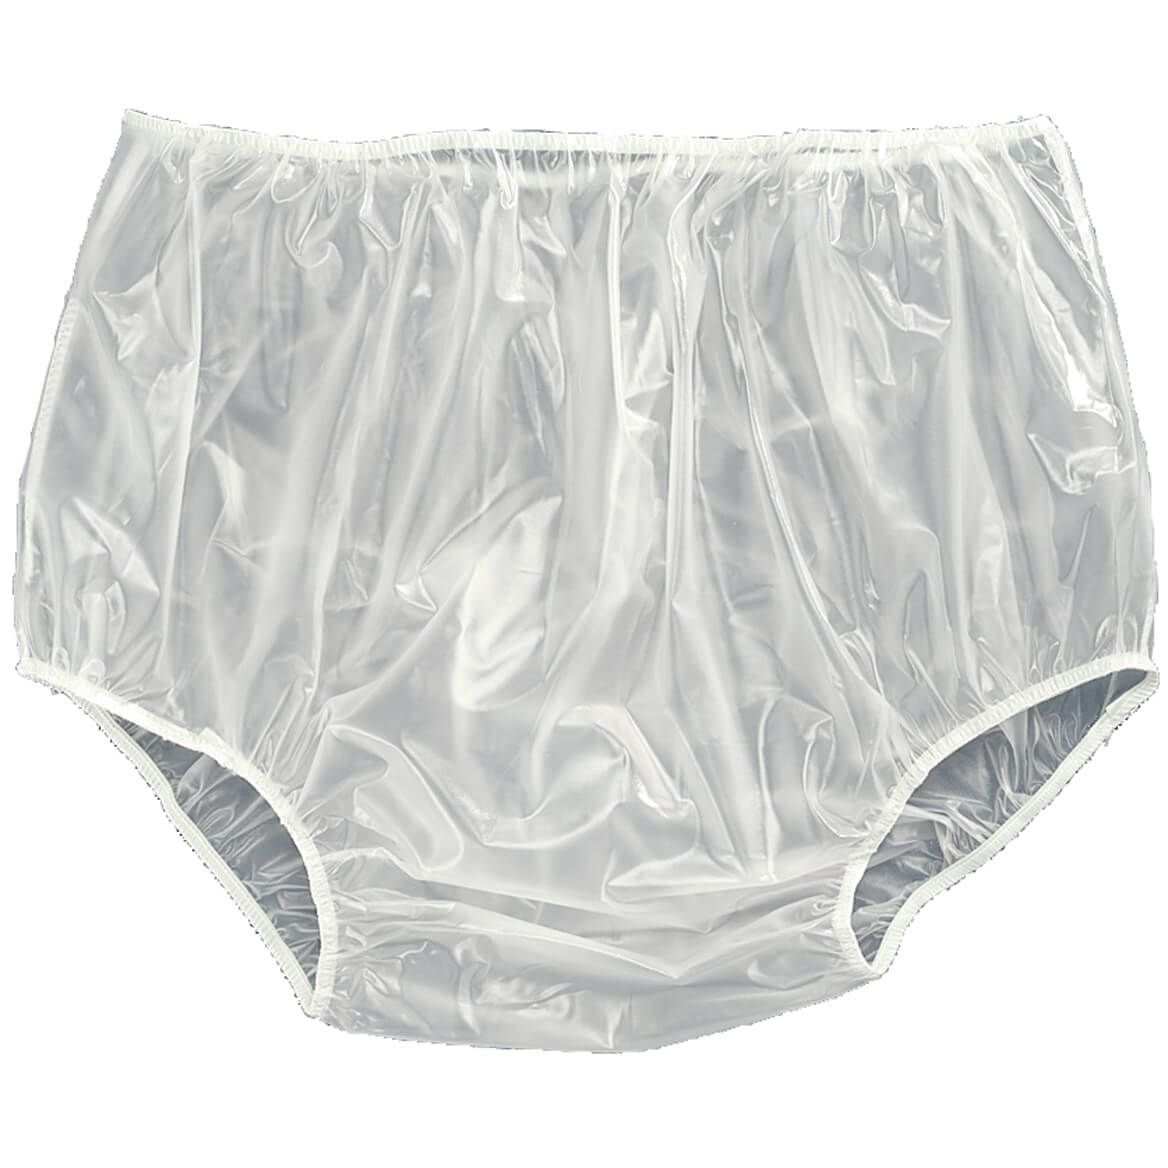 Vinyl Incontinence Underpants for Adults – Set of 3